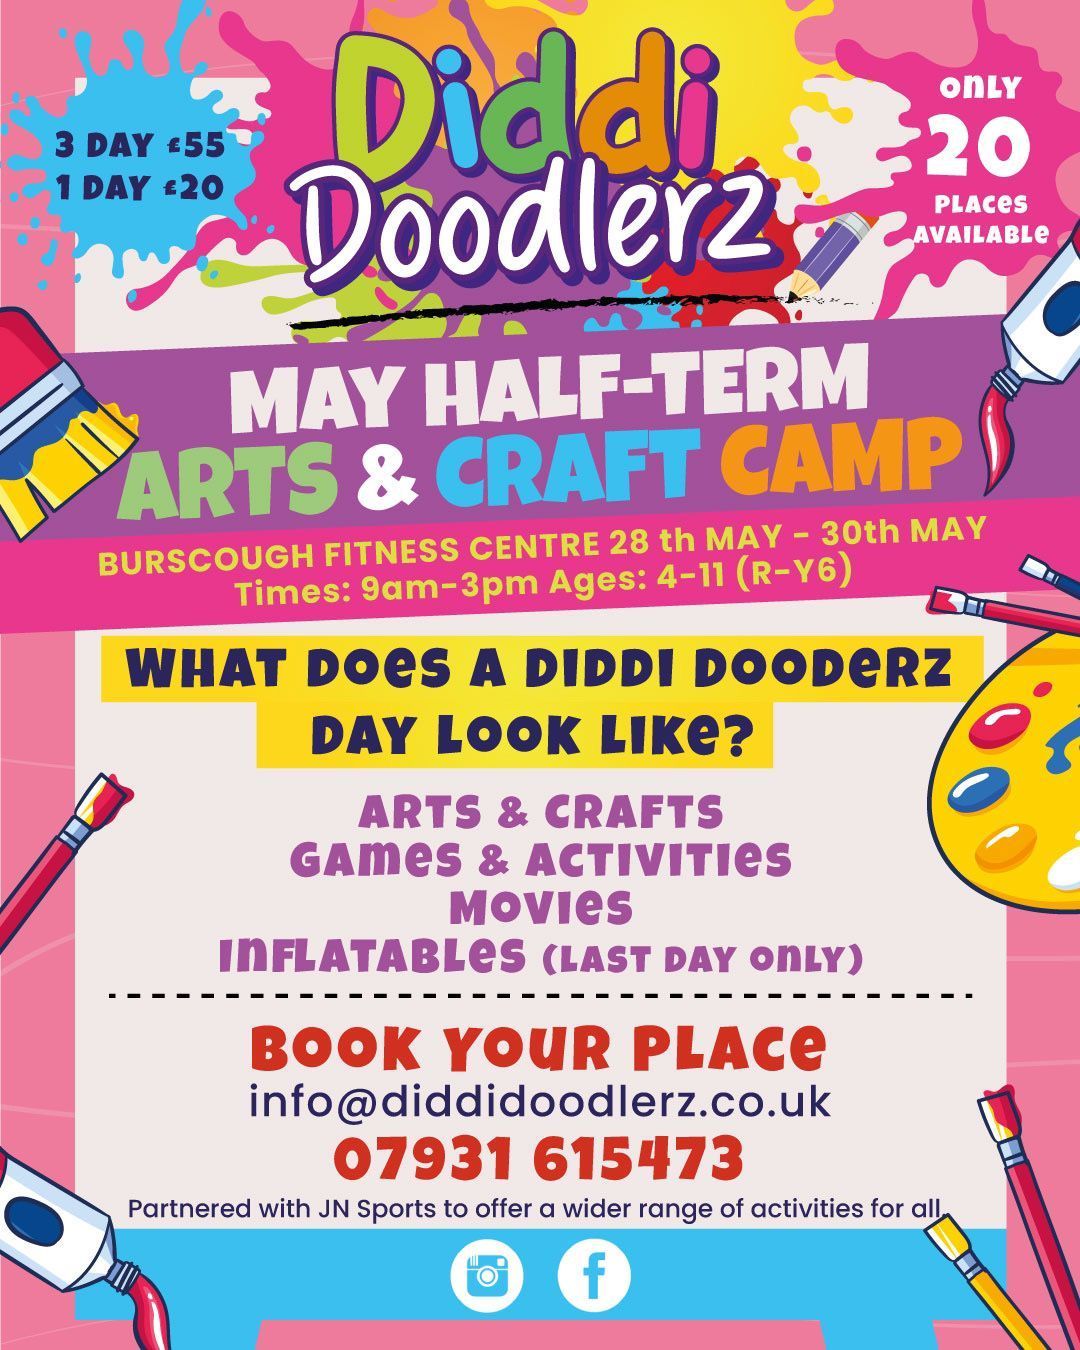 Diddi Doodlerz Half-term Arts and Crafts Camp for 4-11 year olds